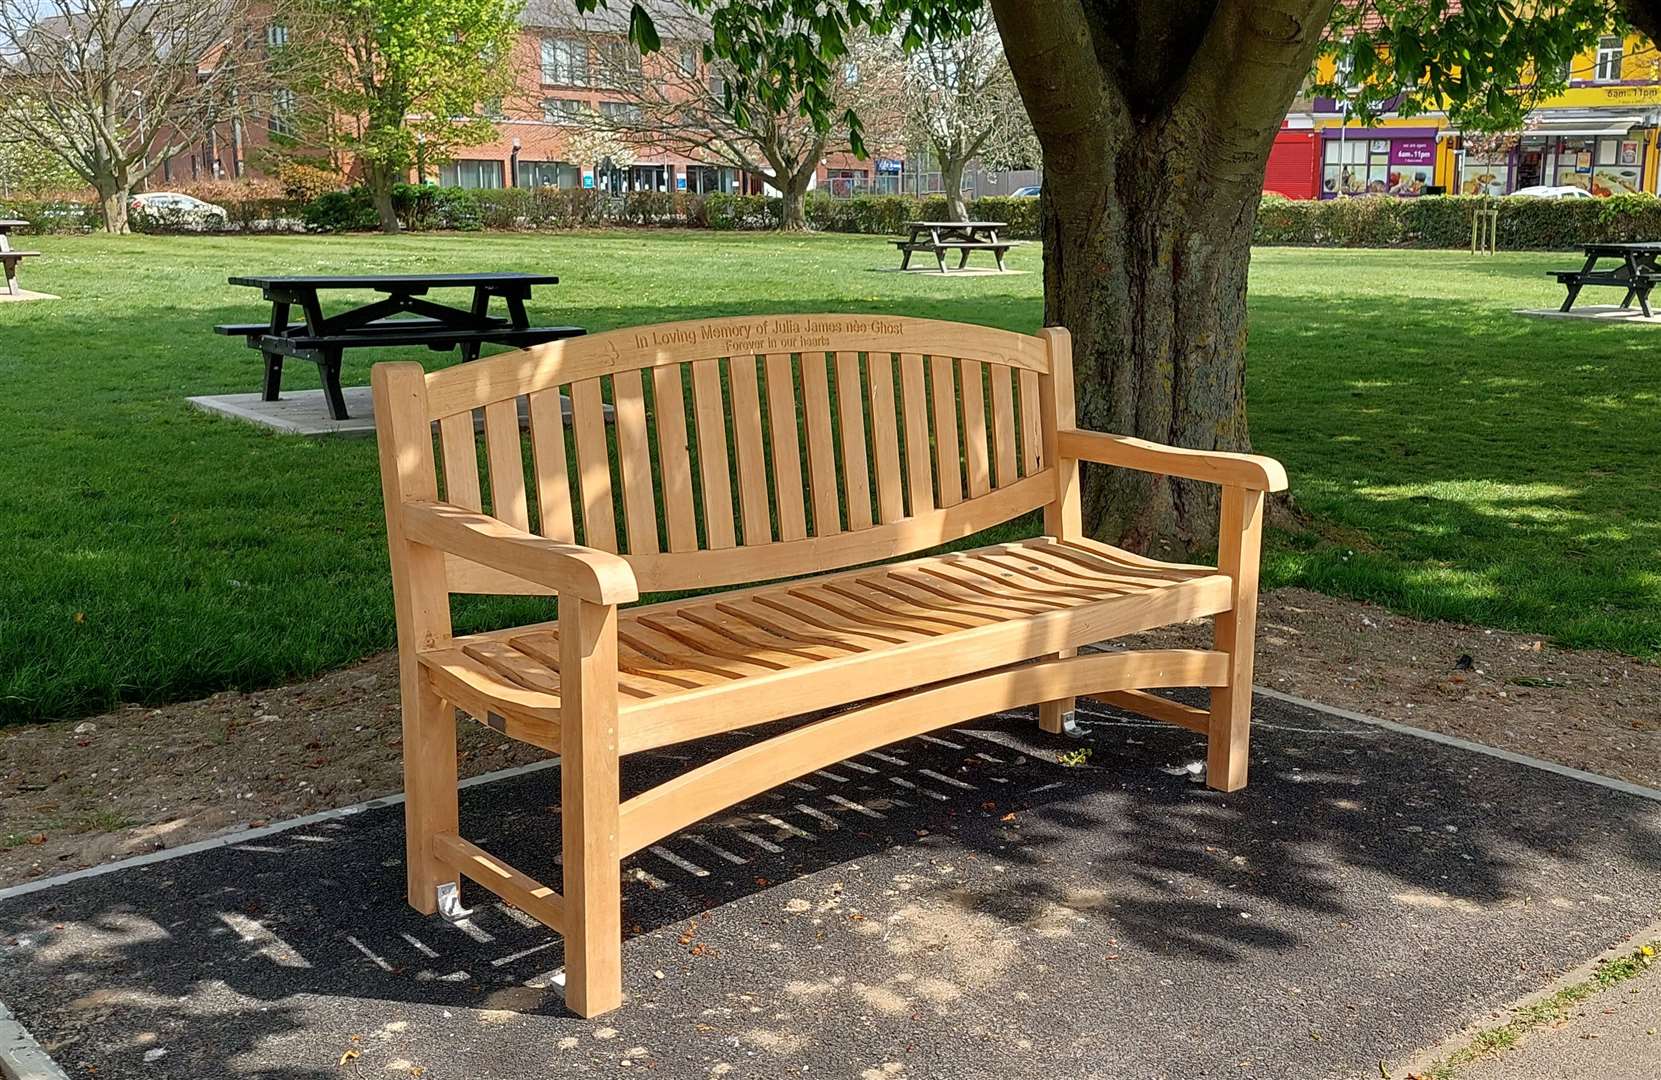 A memorial bench has been erected in Aylesham village square